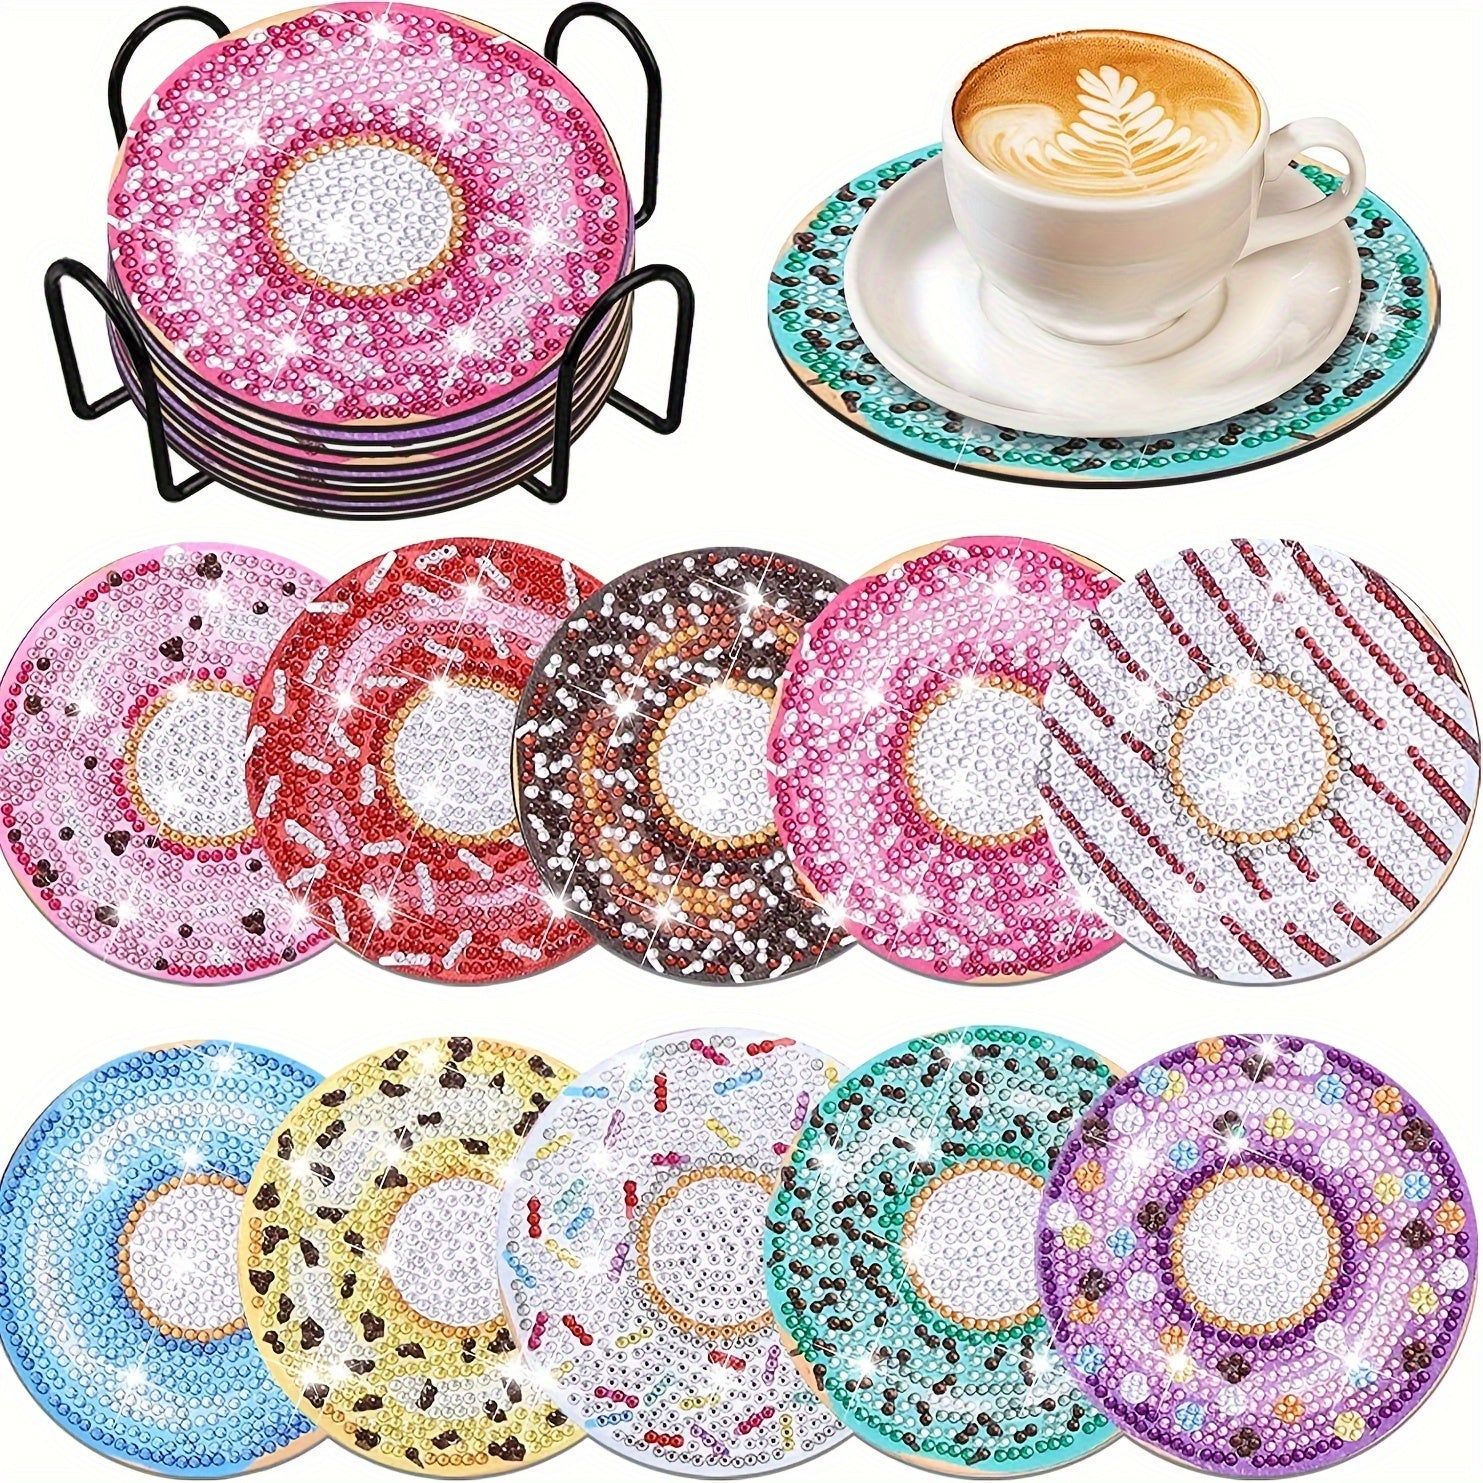 10pcs Colorful Donut Pattern Diamond Painting Coaster Kit DIY Round Coaster Handmade Artwork Diamond Art Kit Holiday Gift Home Kitchen Decoration Gift For Family And Friends Size 10cm10cm393in393in